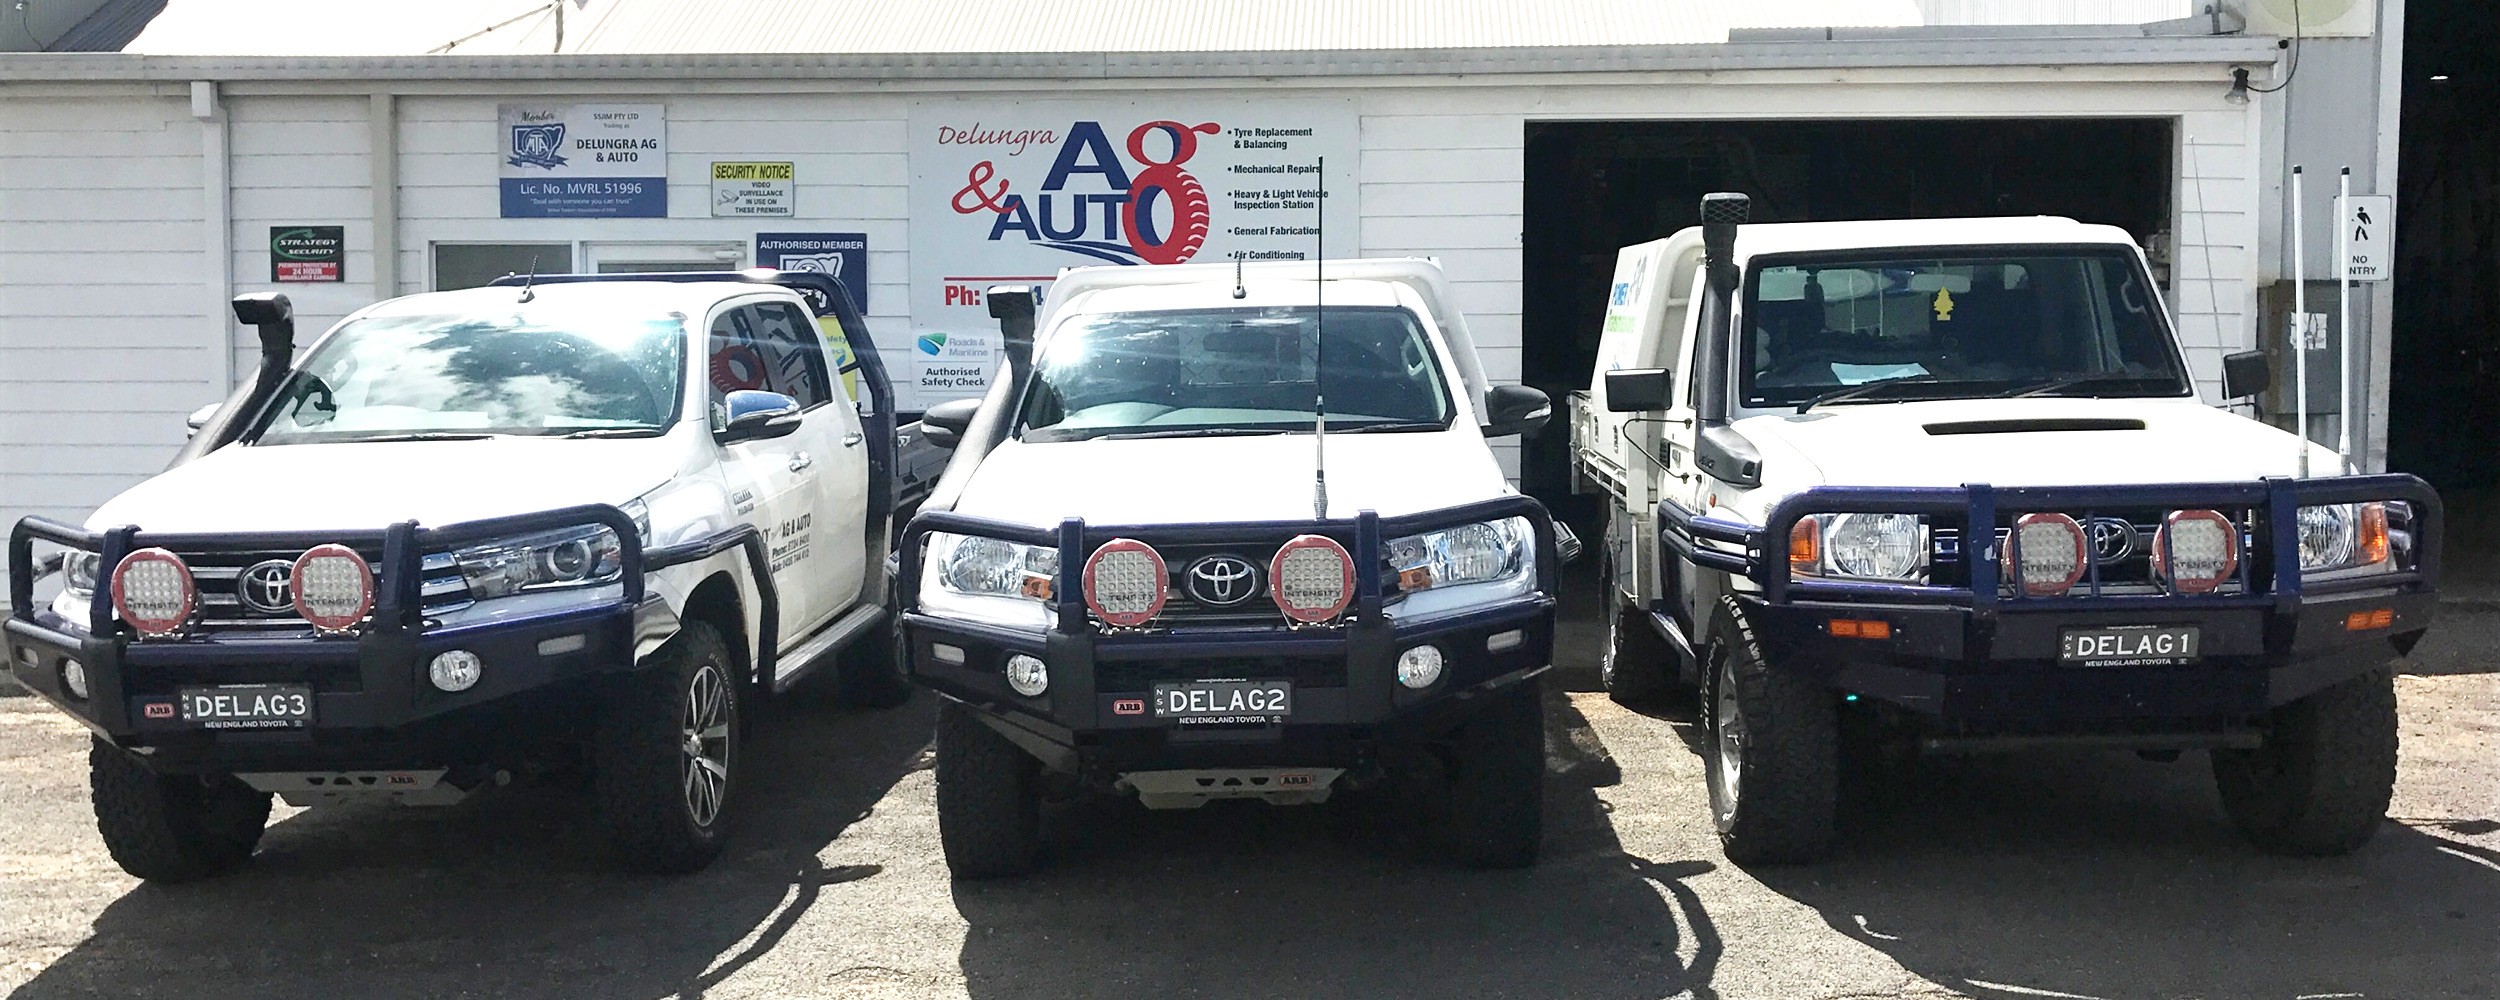 delungra ag and auto